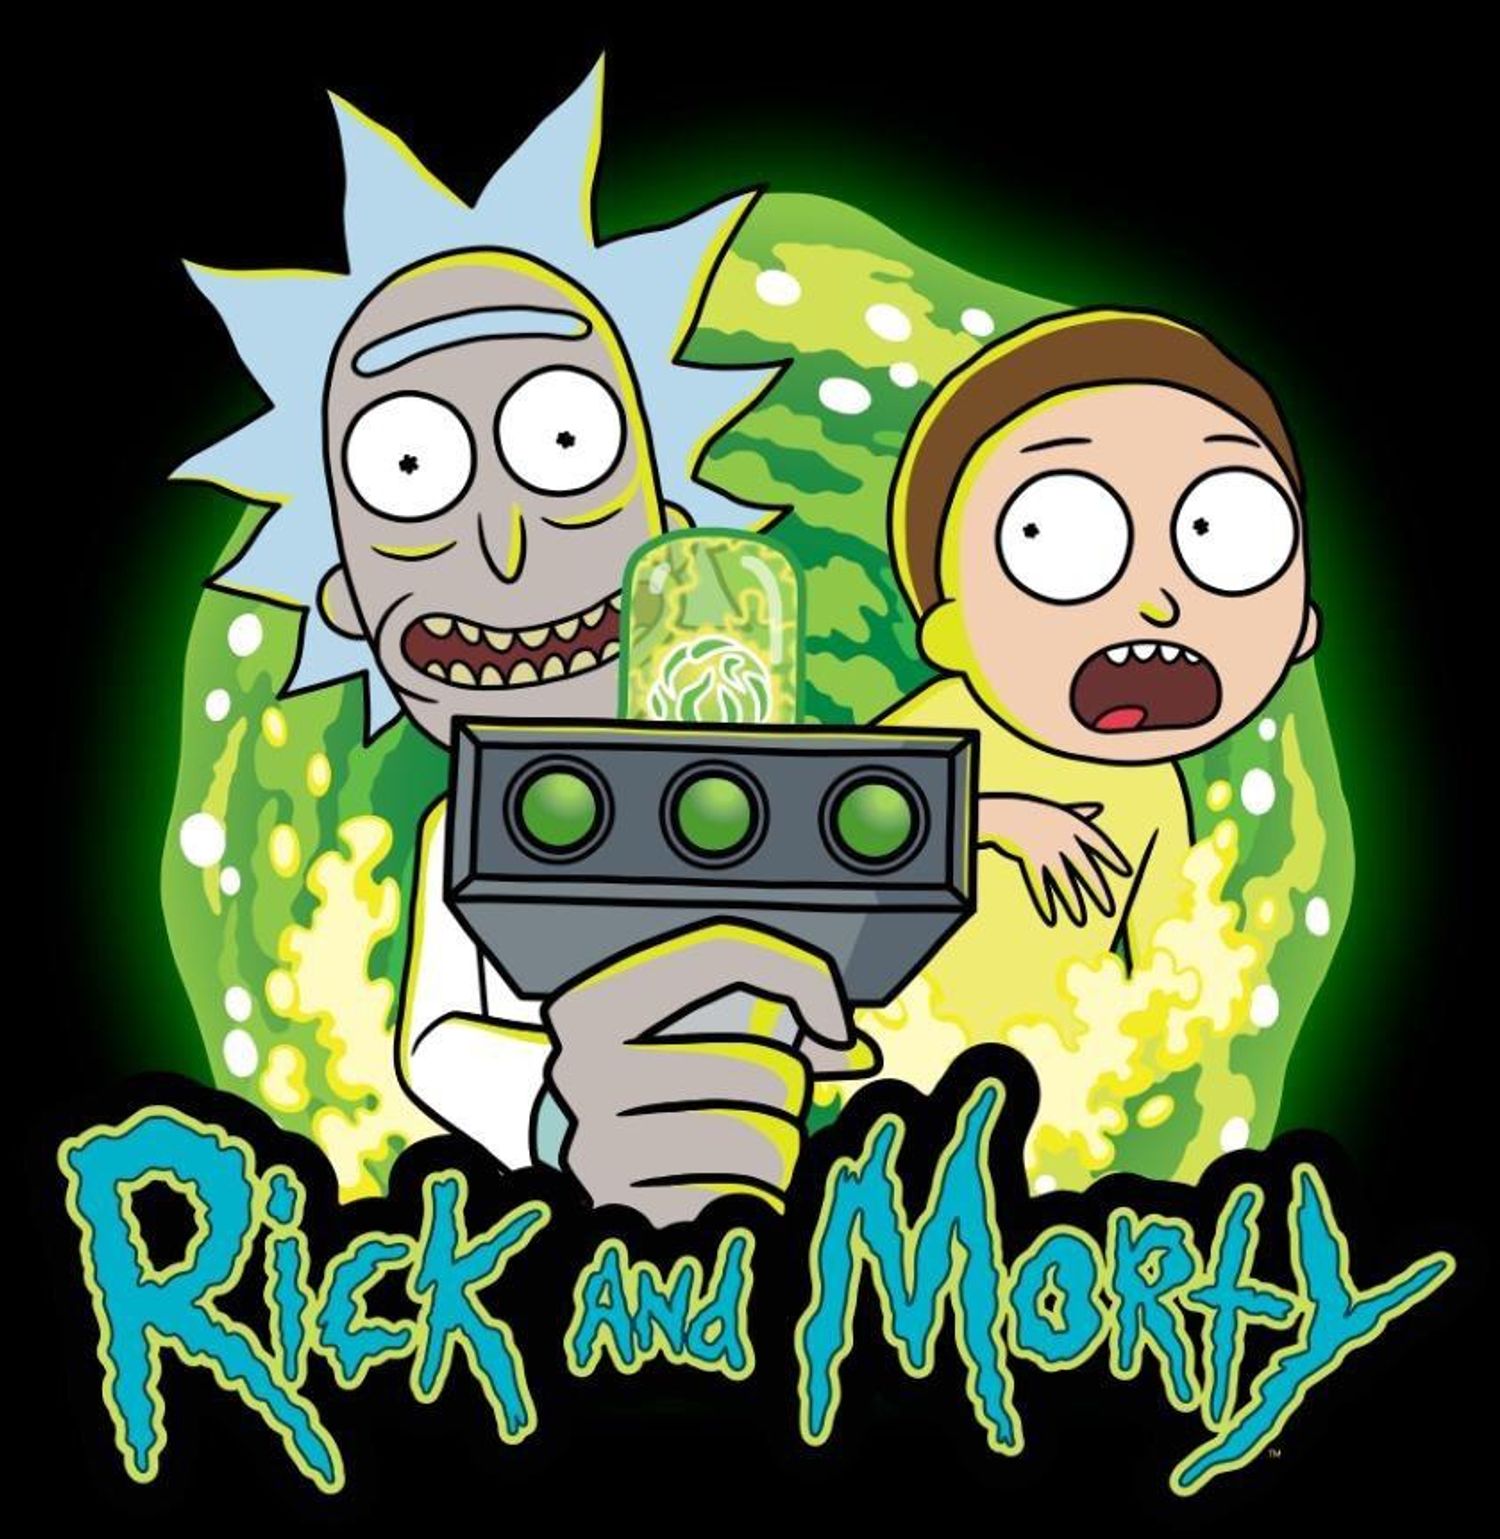 Rick and Morty Portal Wallpaper I drew for two split-screen